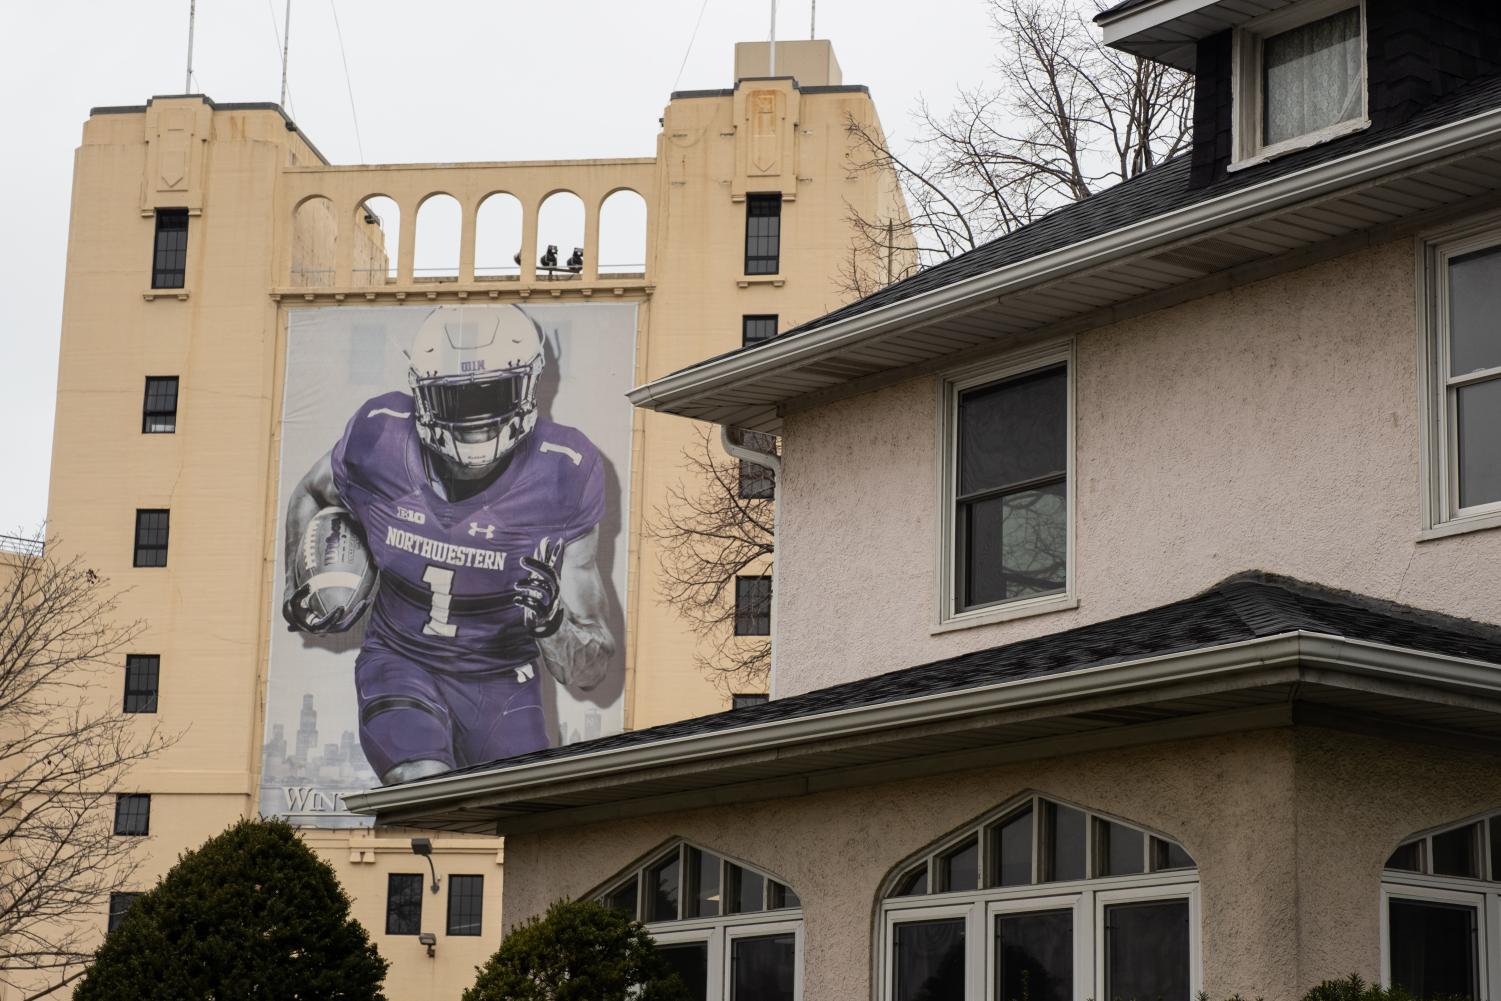 An+image+of+a+football+player+wearing+purple+hangs+on+the+side+of+a+tan+building.